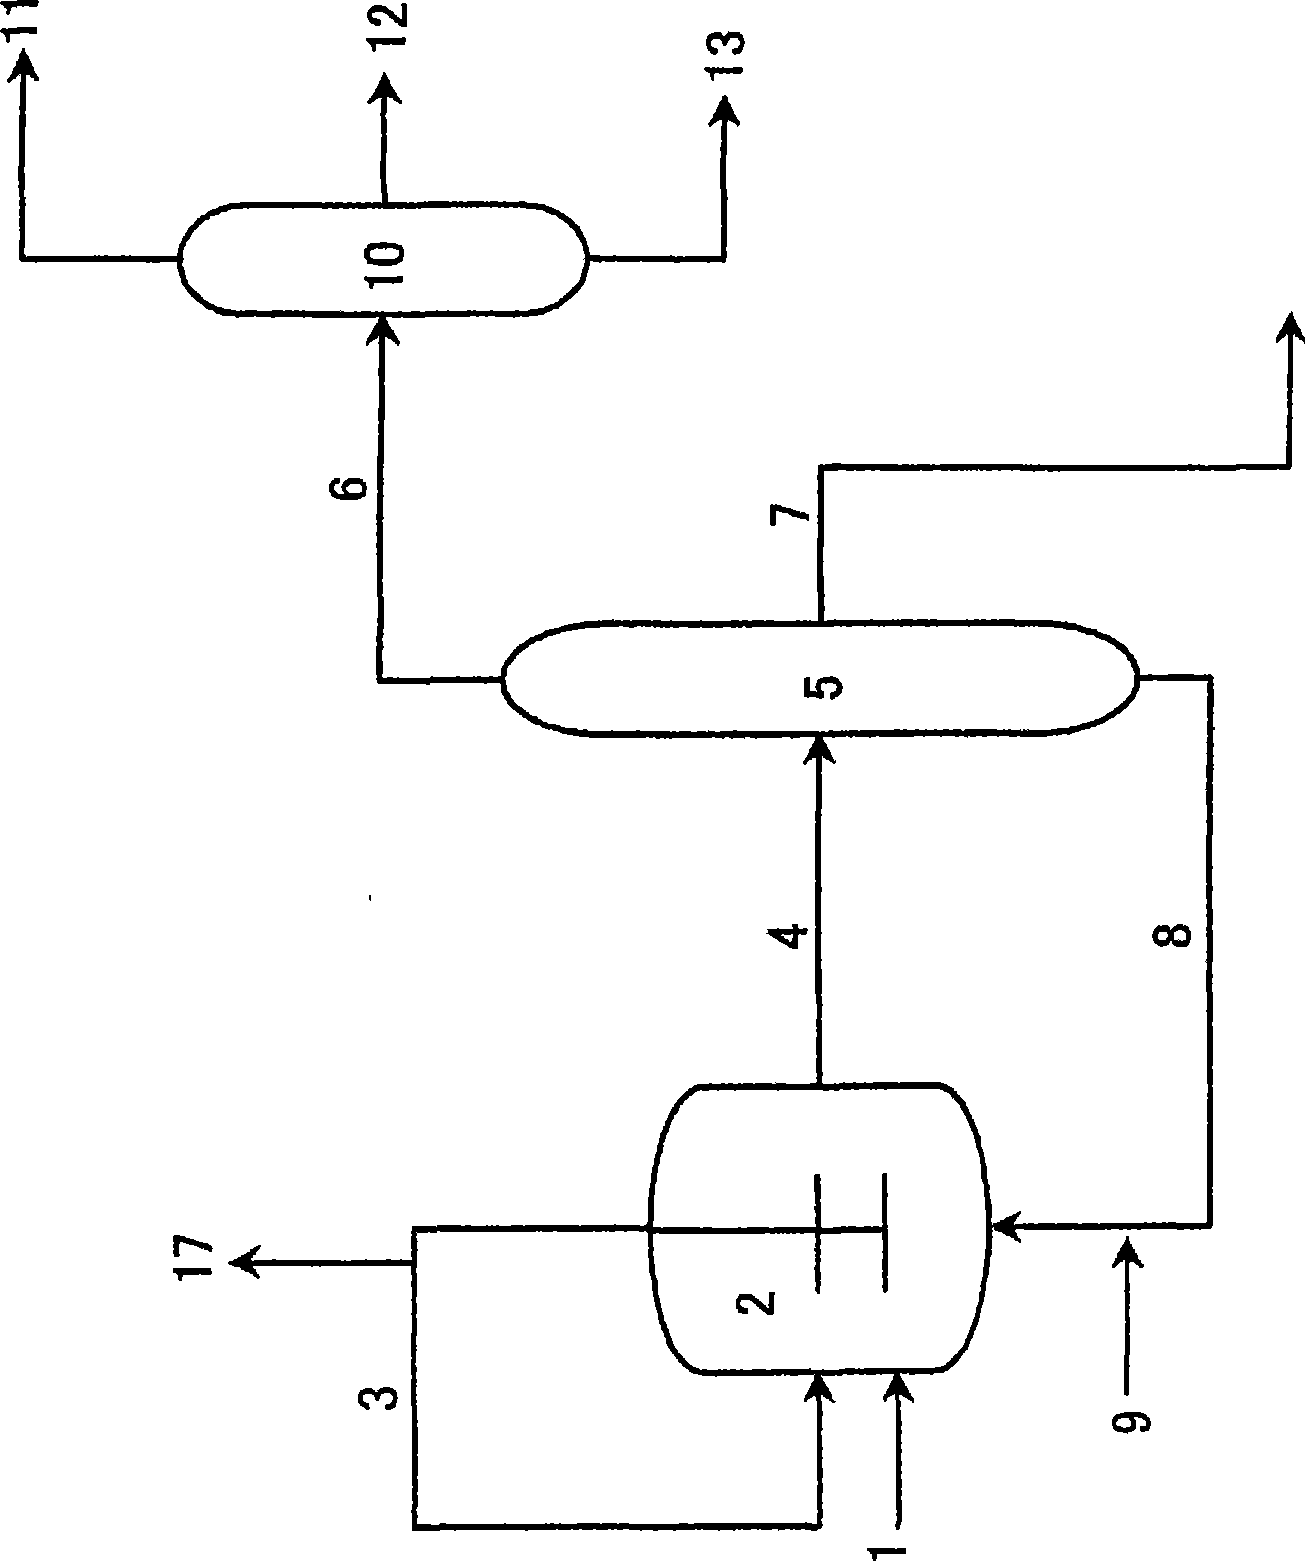 Process for coproduction of normal butanol and isobutyraldehyde